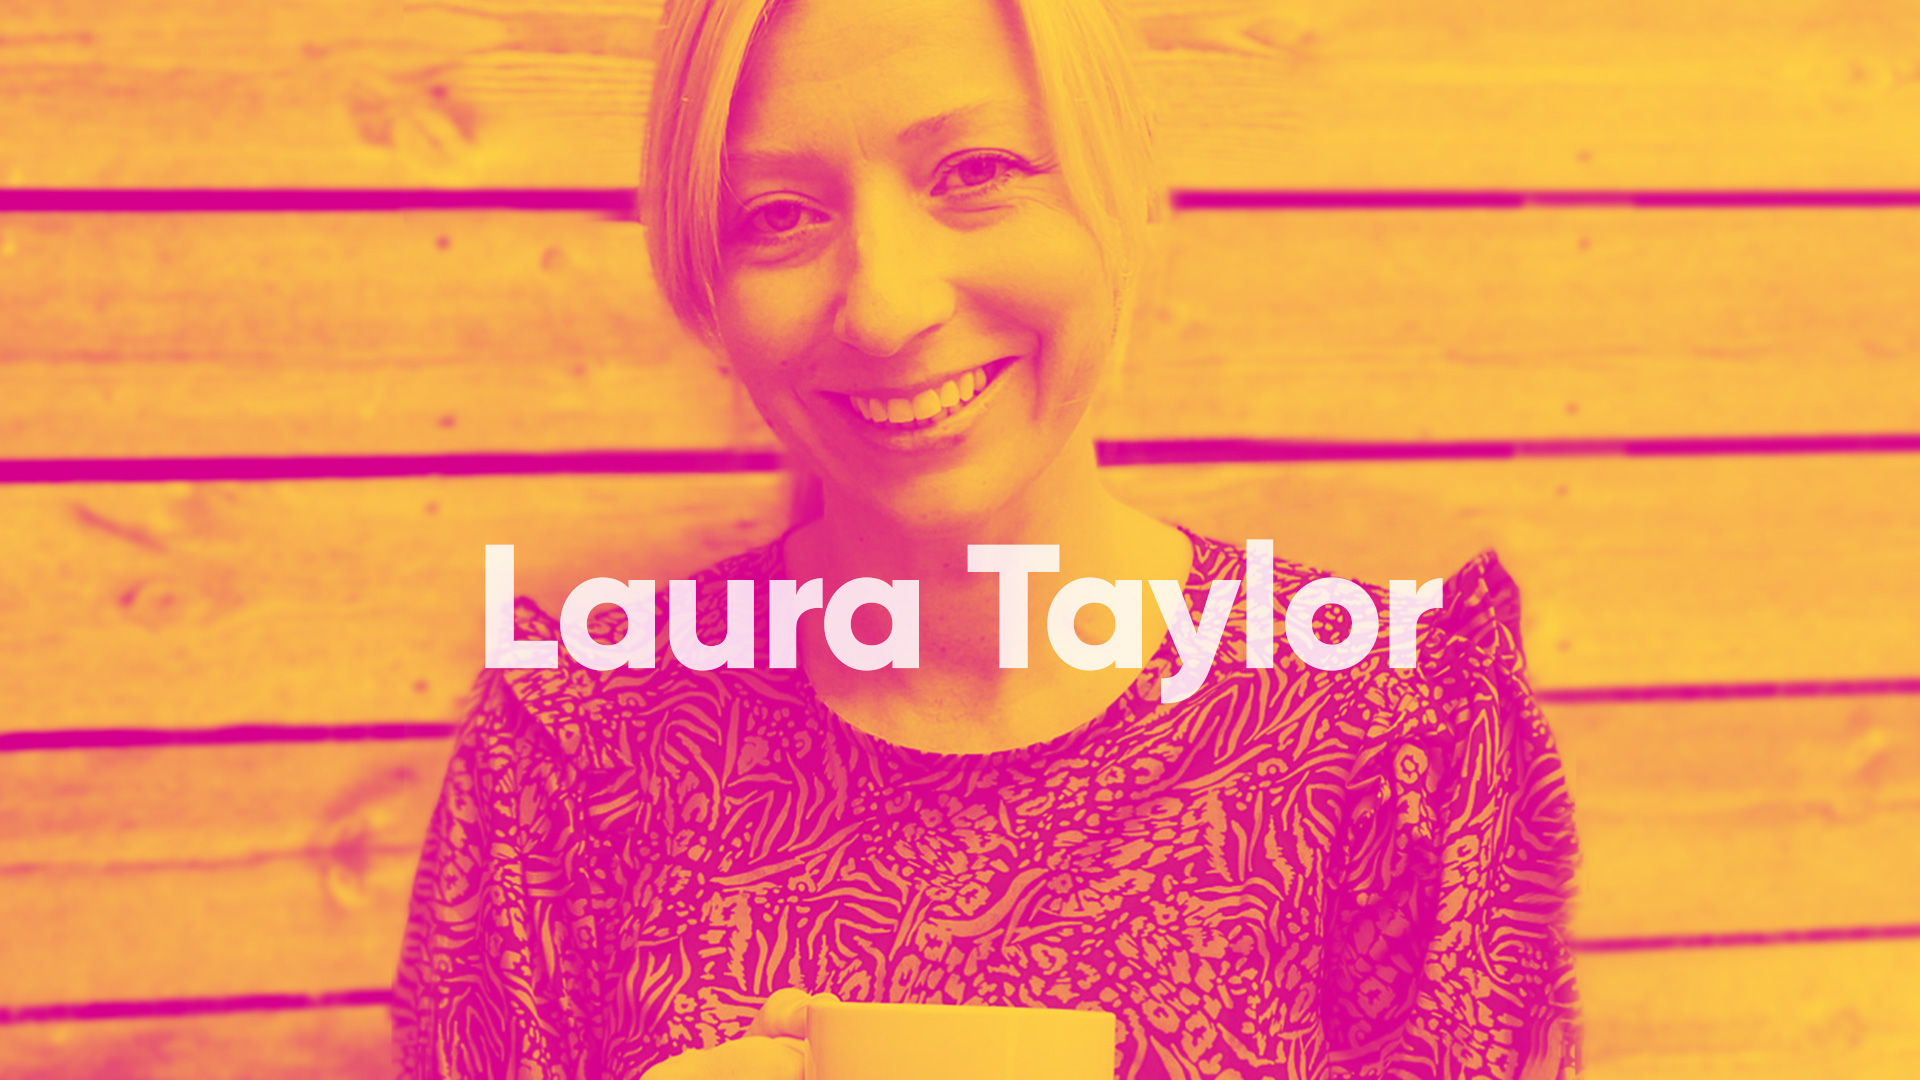 Laura Taylor Joins We Are 778